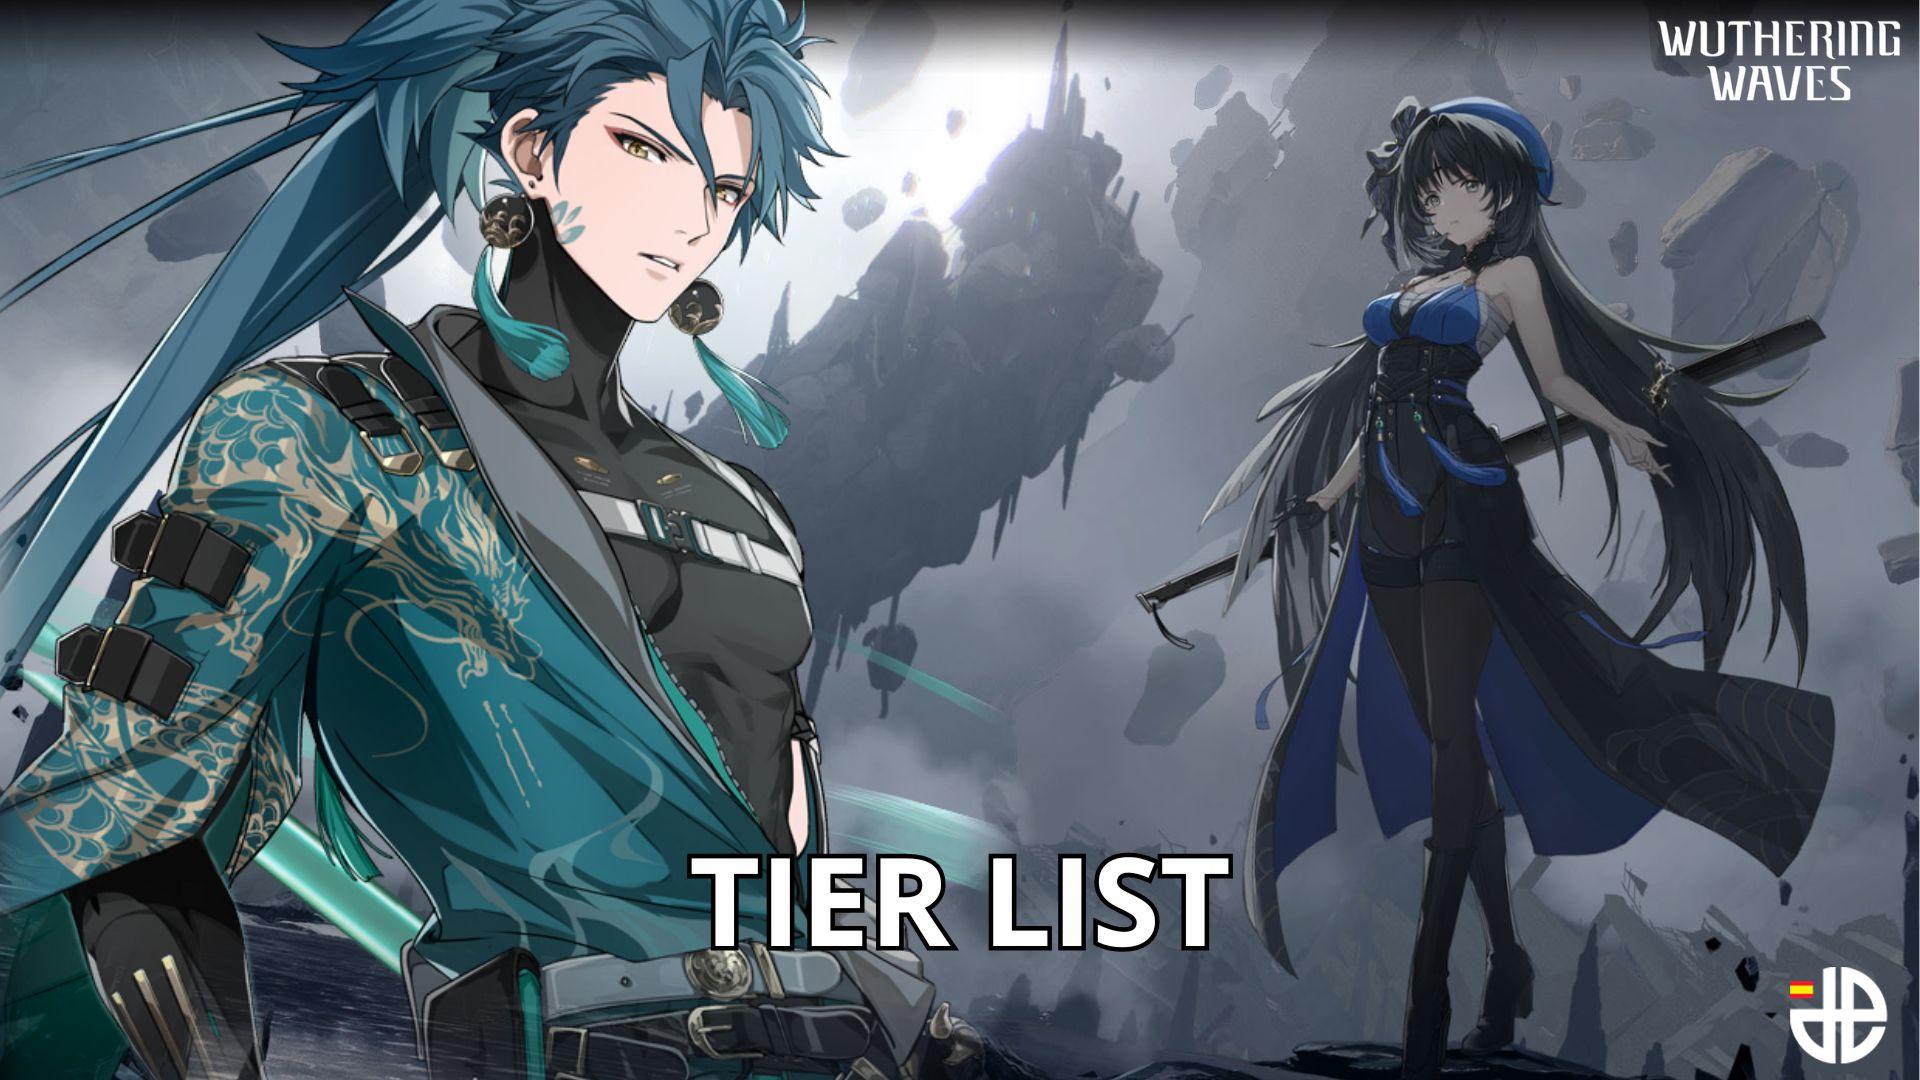 TIER LIST WUTHERING WAVES